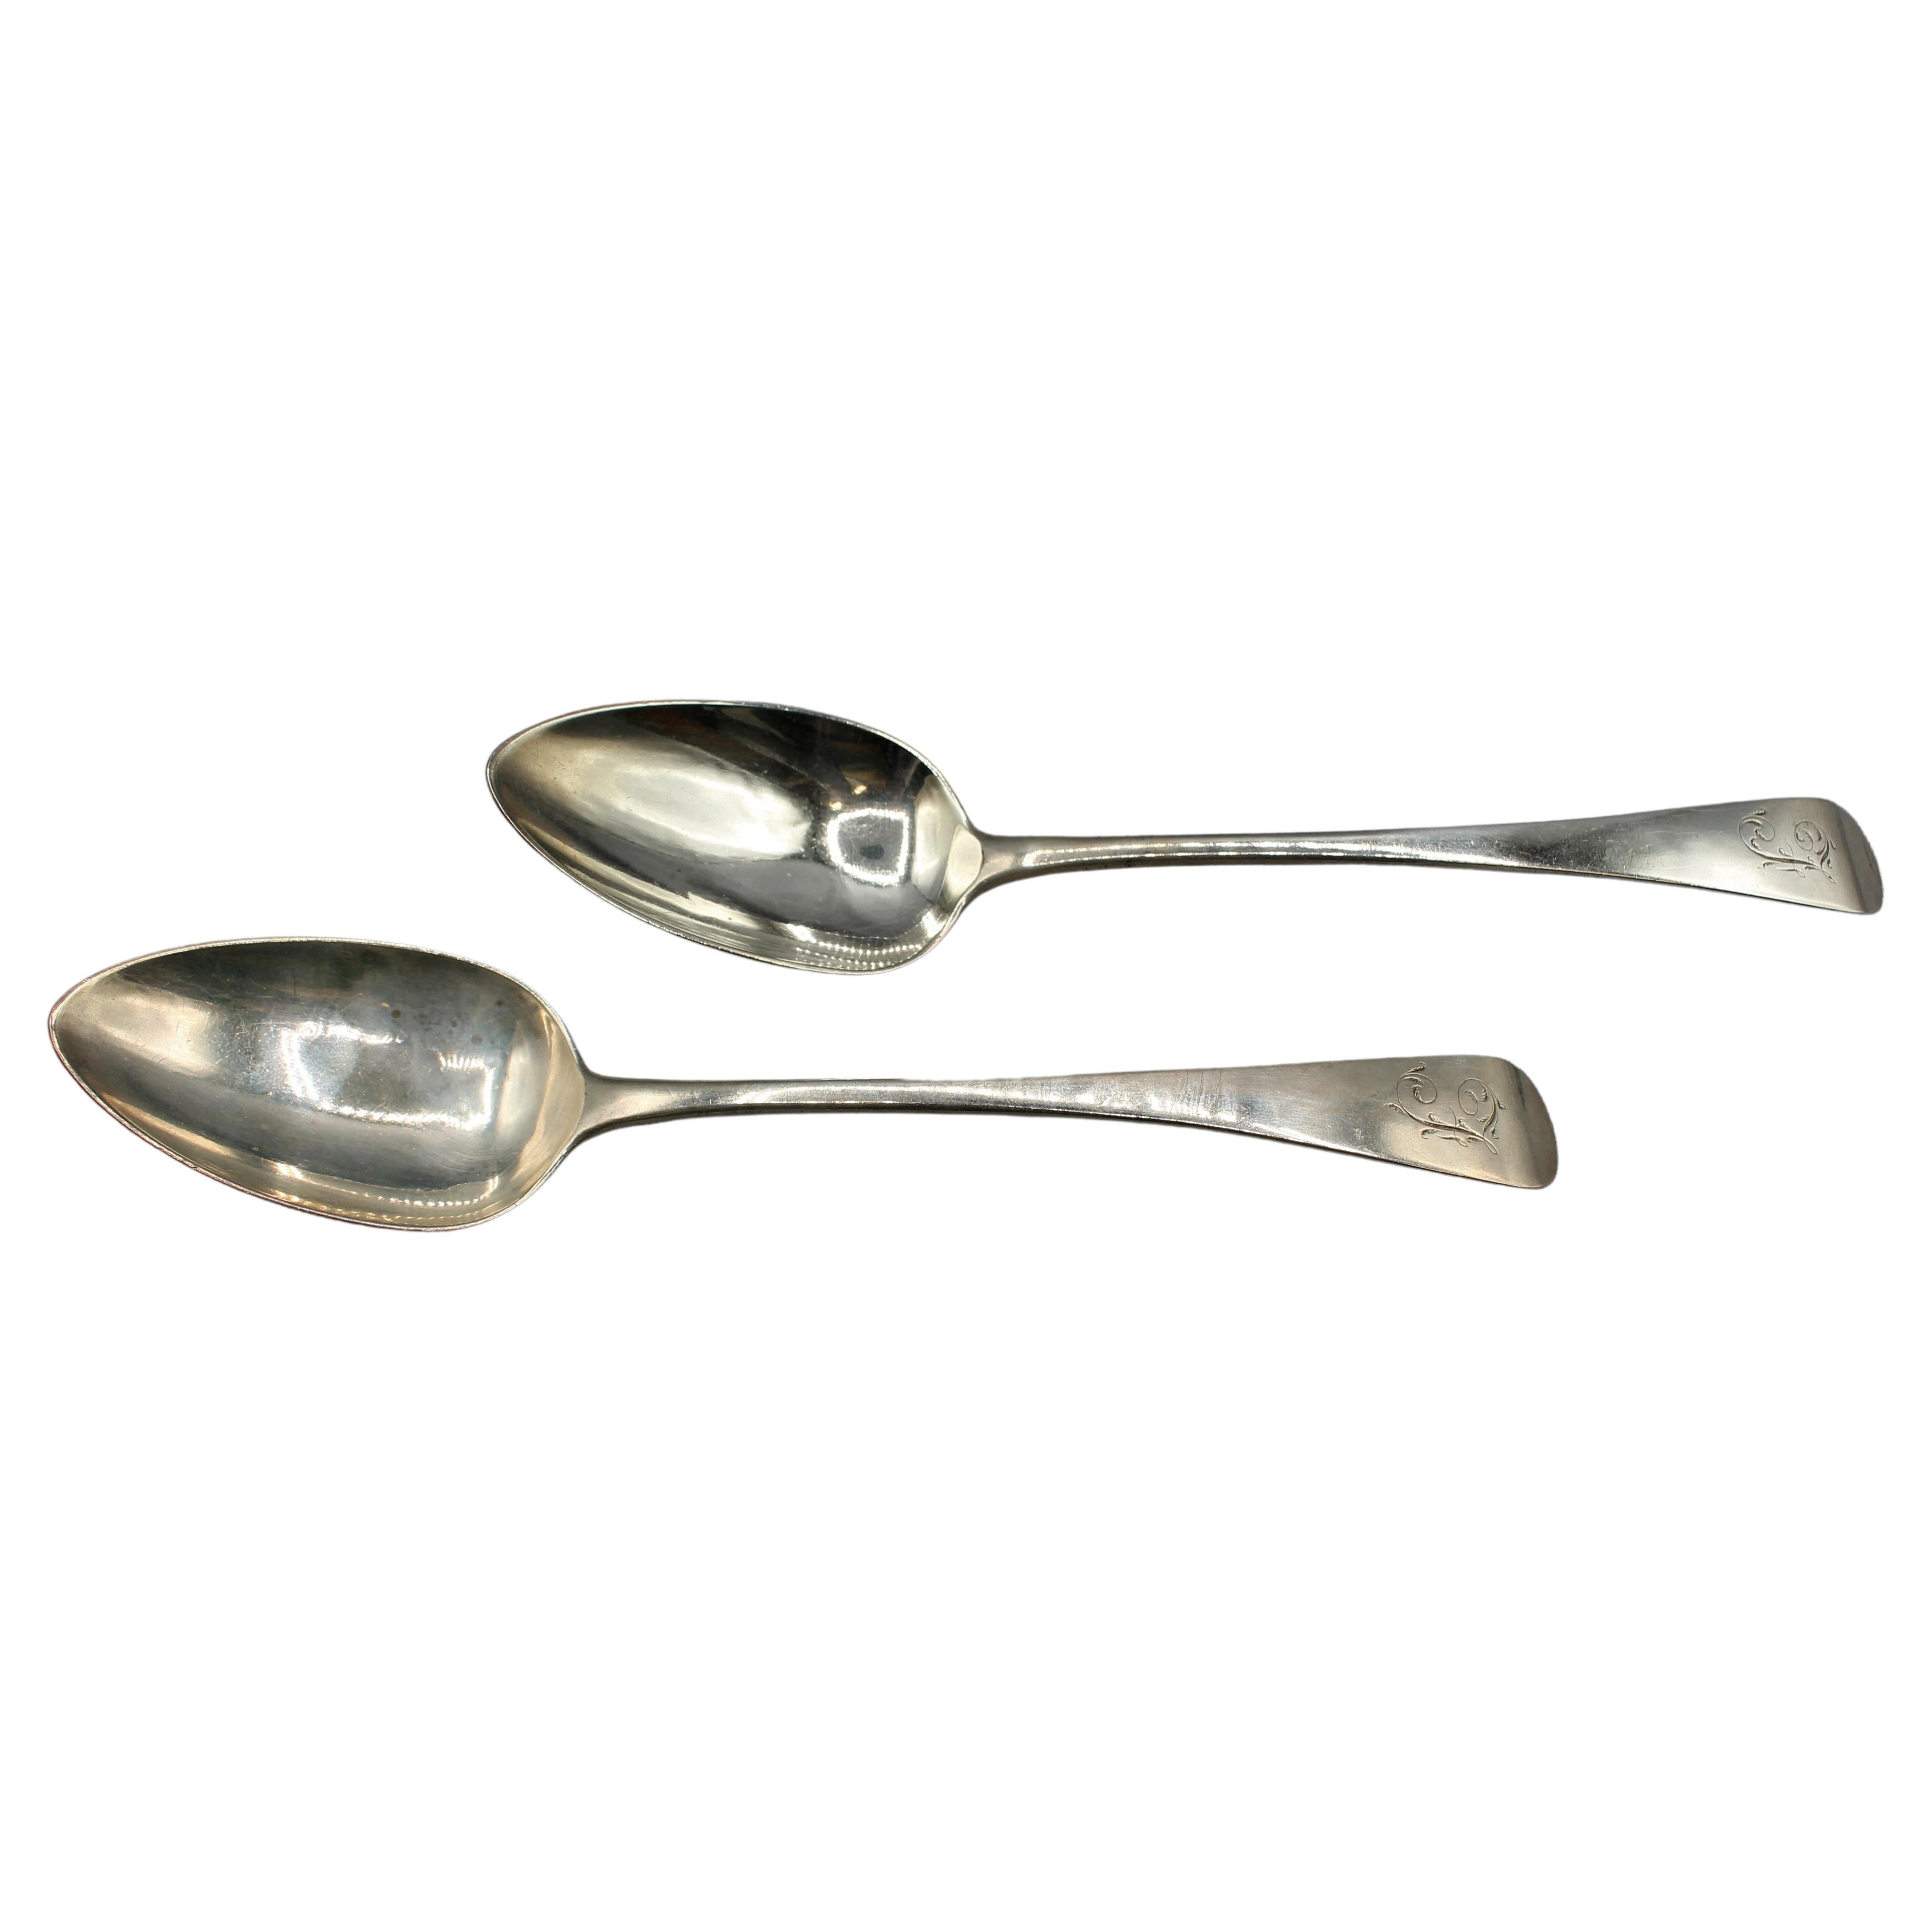 1811 Pair of Sterling Silver Tablespoons by Peter & William Bateman For Sale